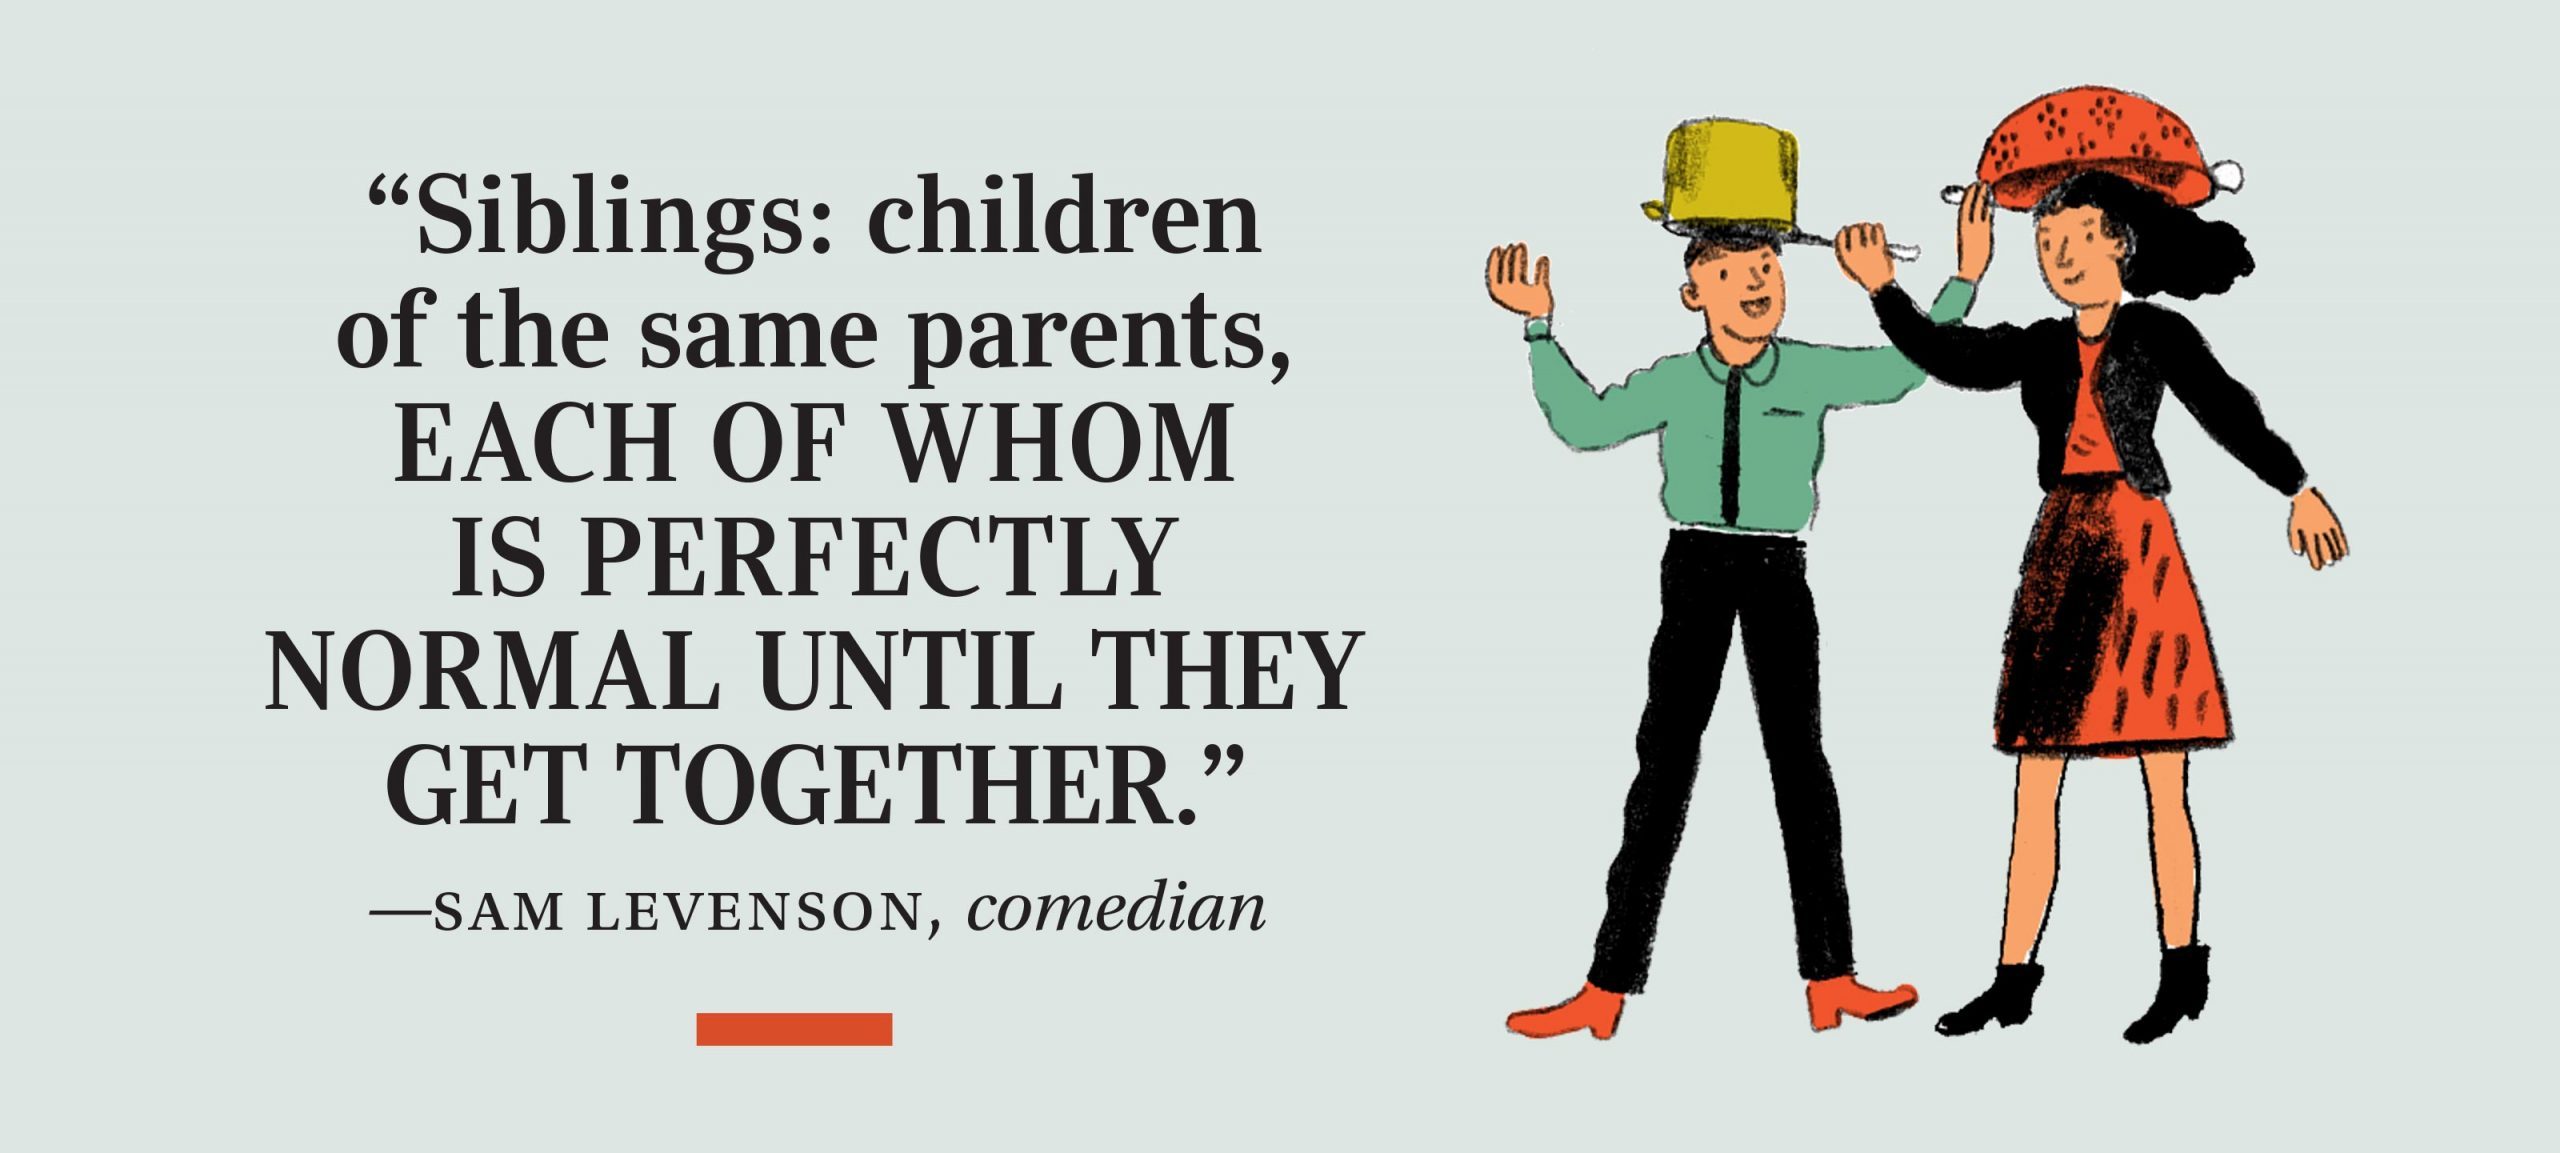 “Siblings: children of the same parents, each of whom is perfectly normal until they get together.” —Sam Levenson, comedian